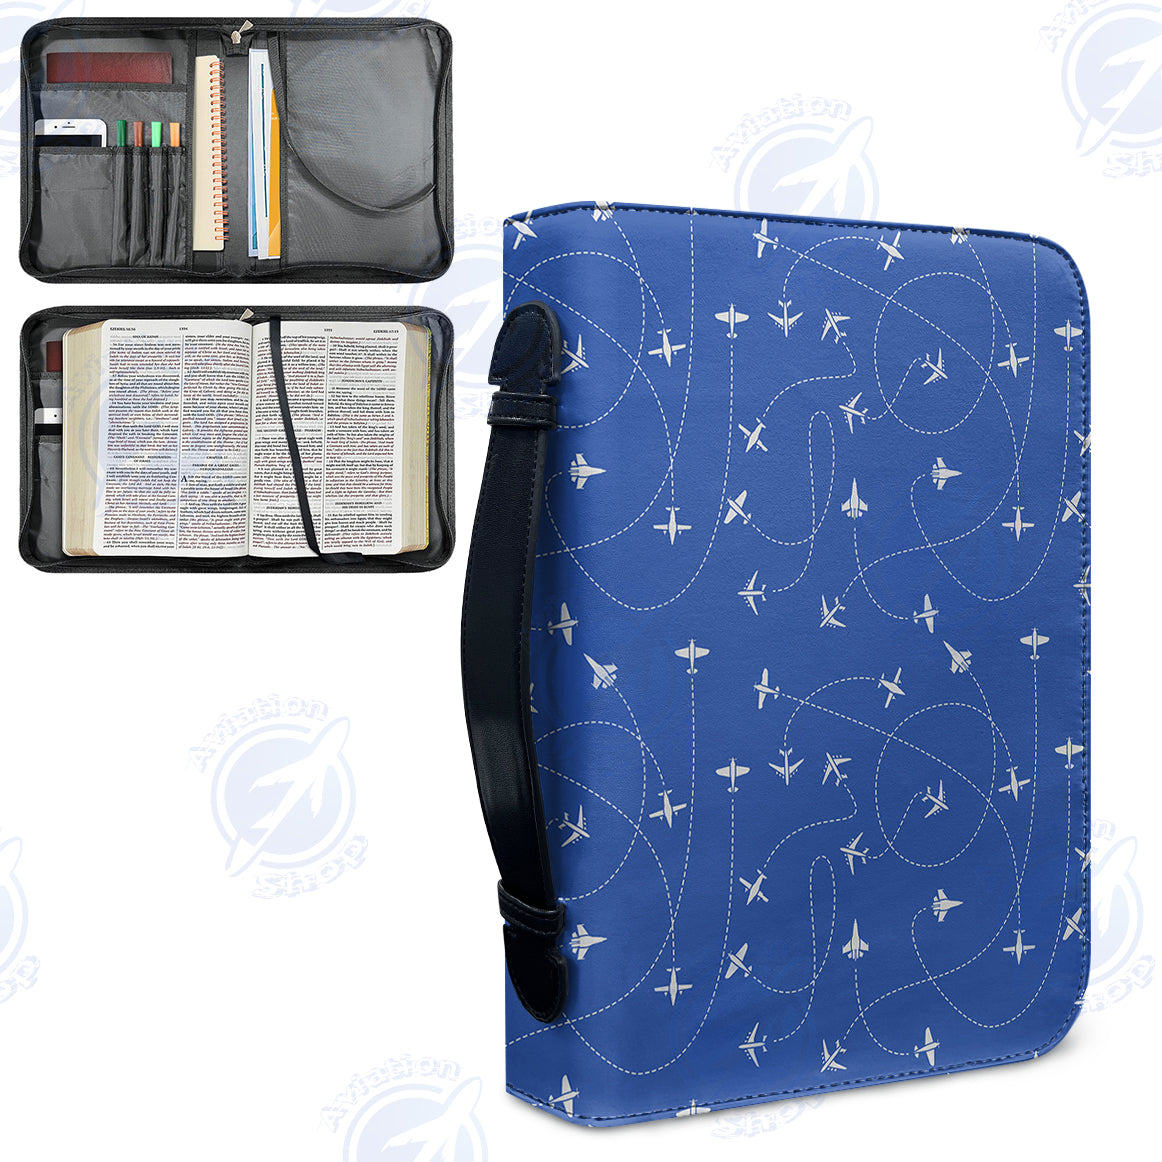 Travel The World By Plane (Blue) Designed PU Accessories Bags